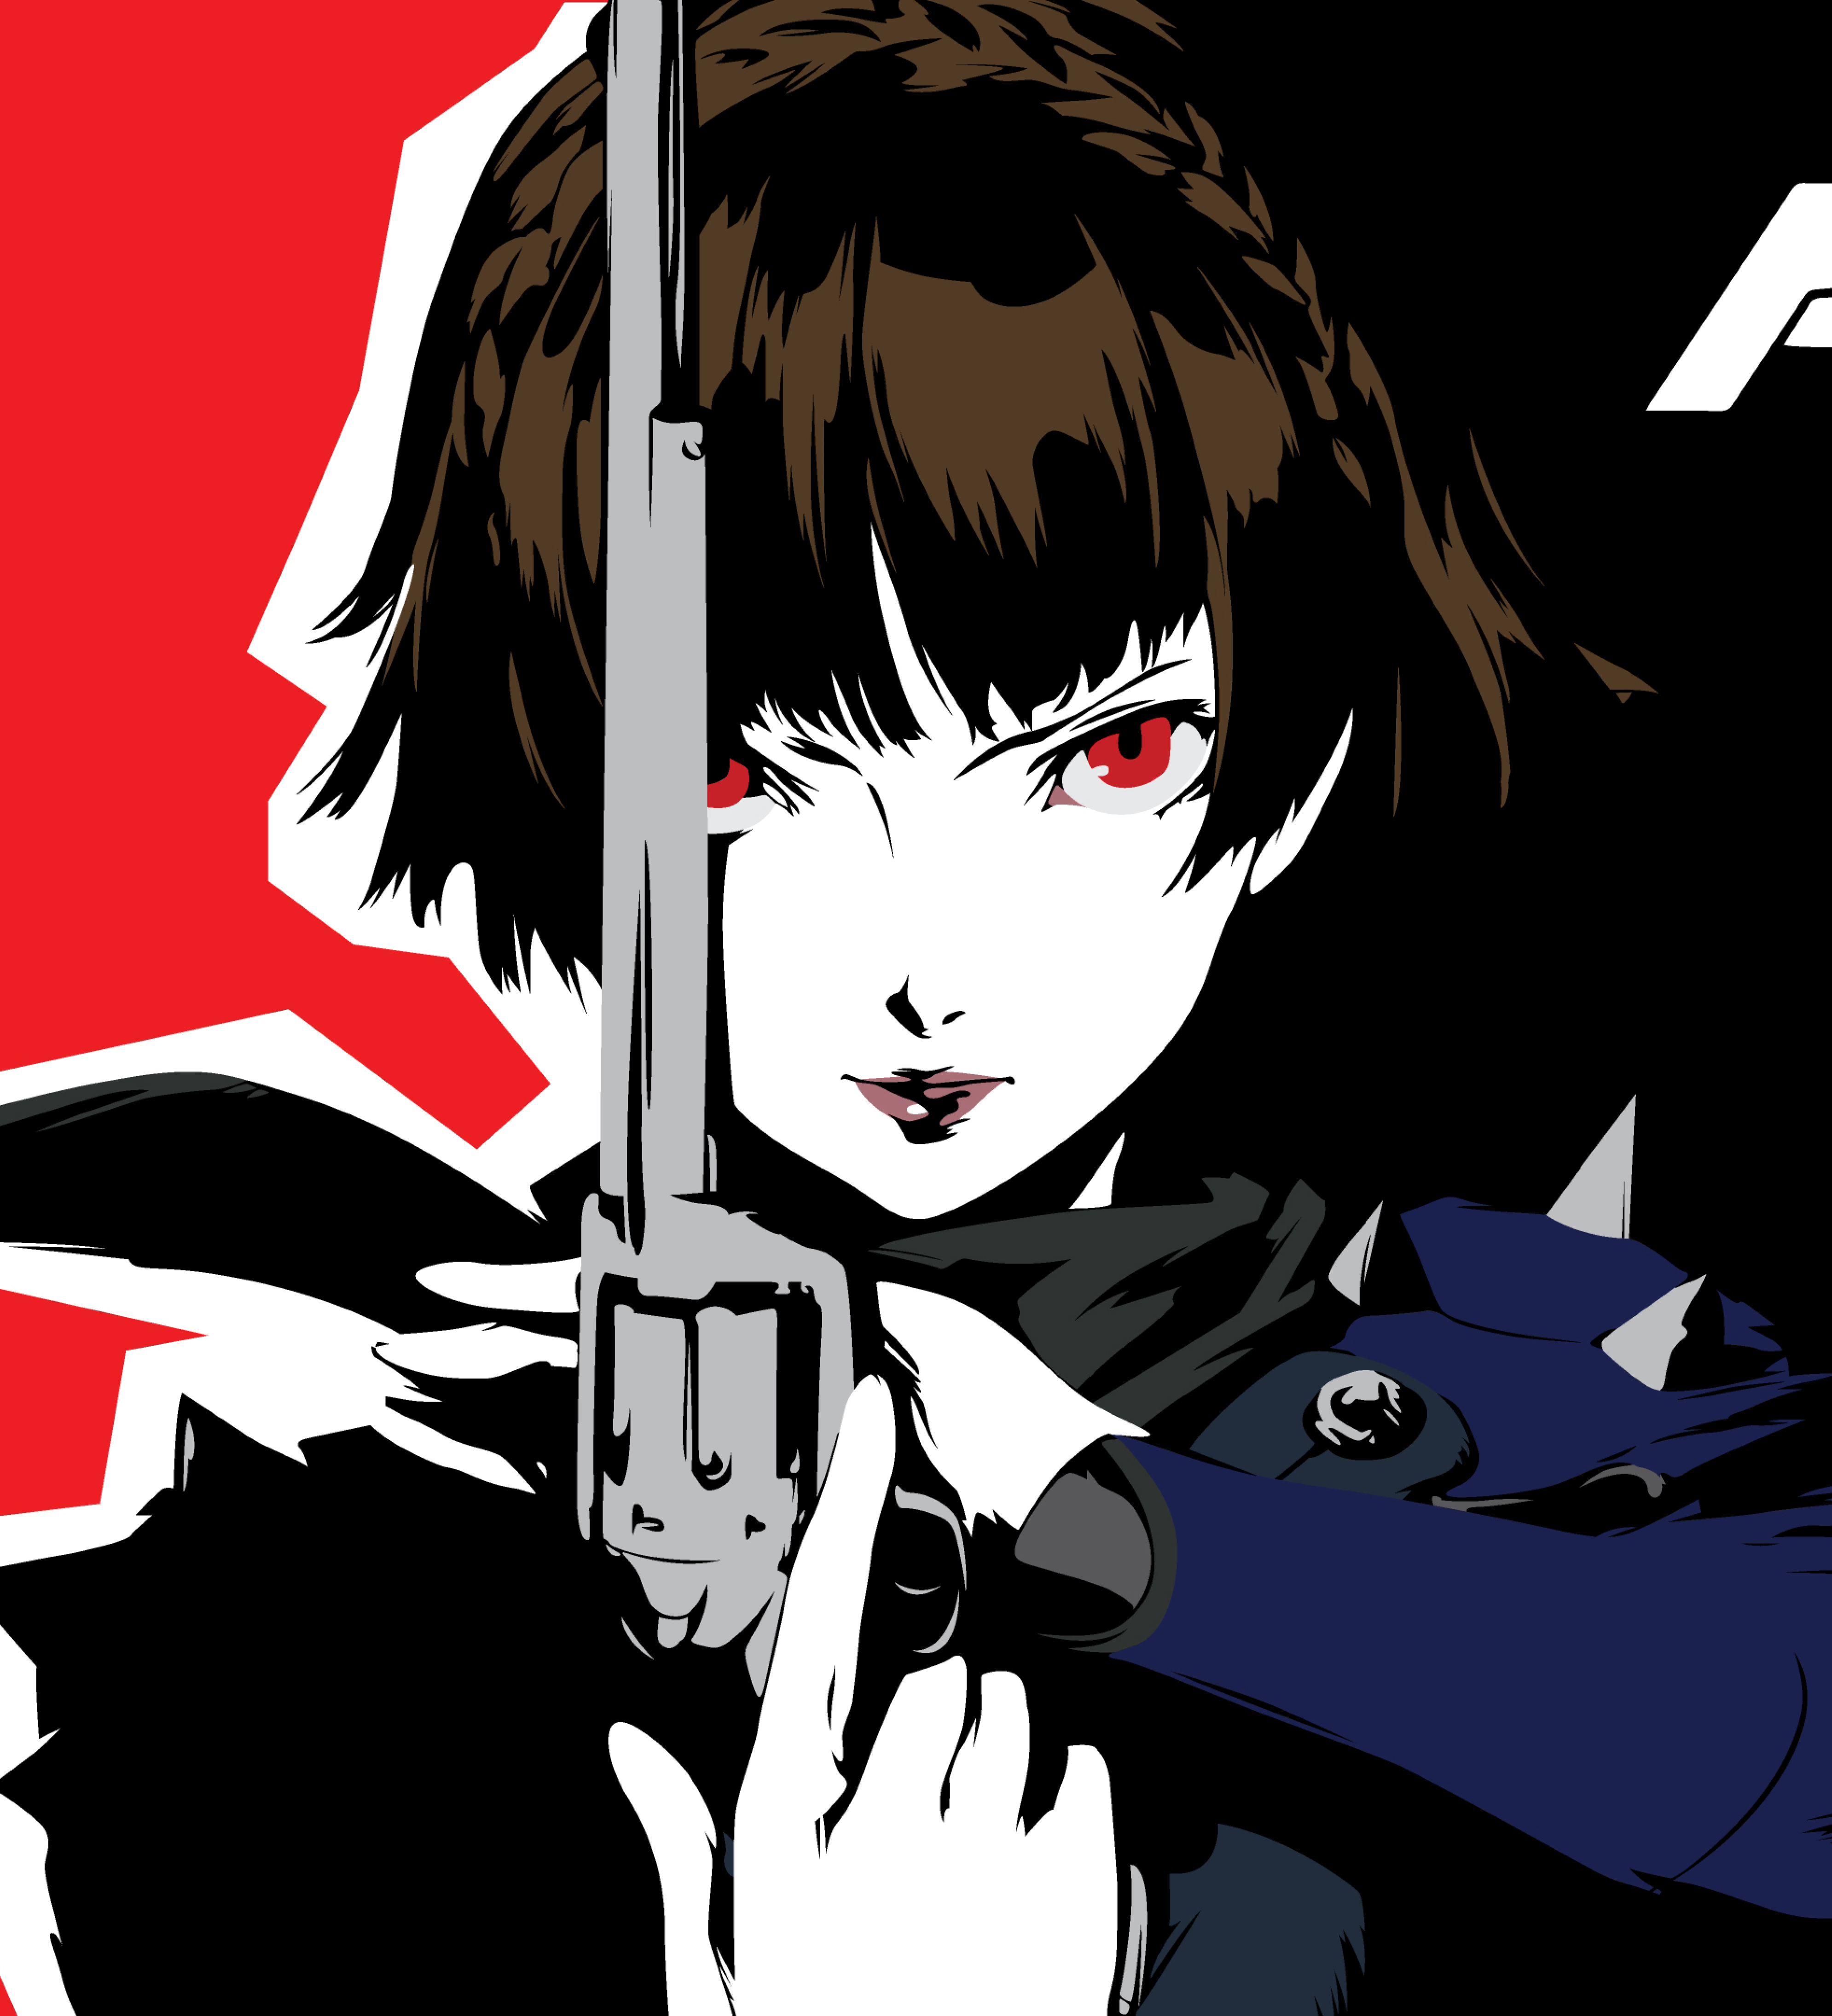 3980x4380 Resolution Queen Persona 5 Anime Girl 4K 3980x4380 Resolution ...